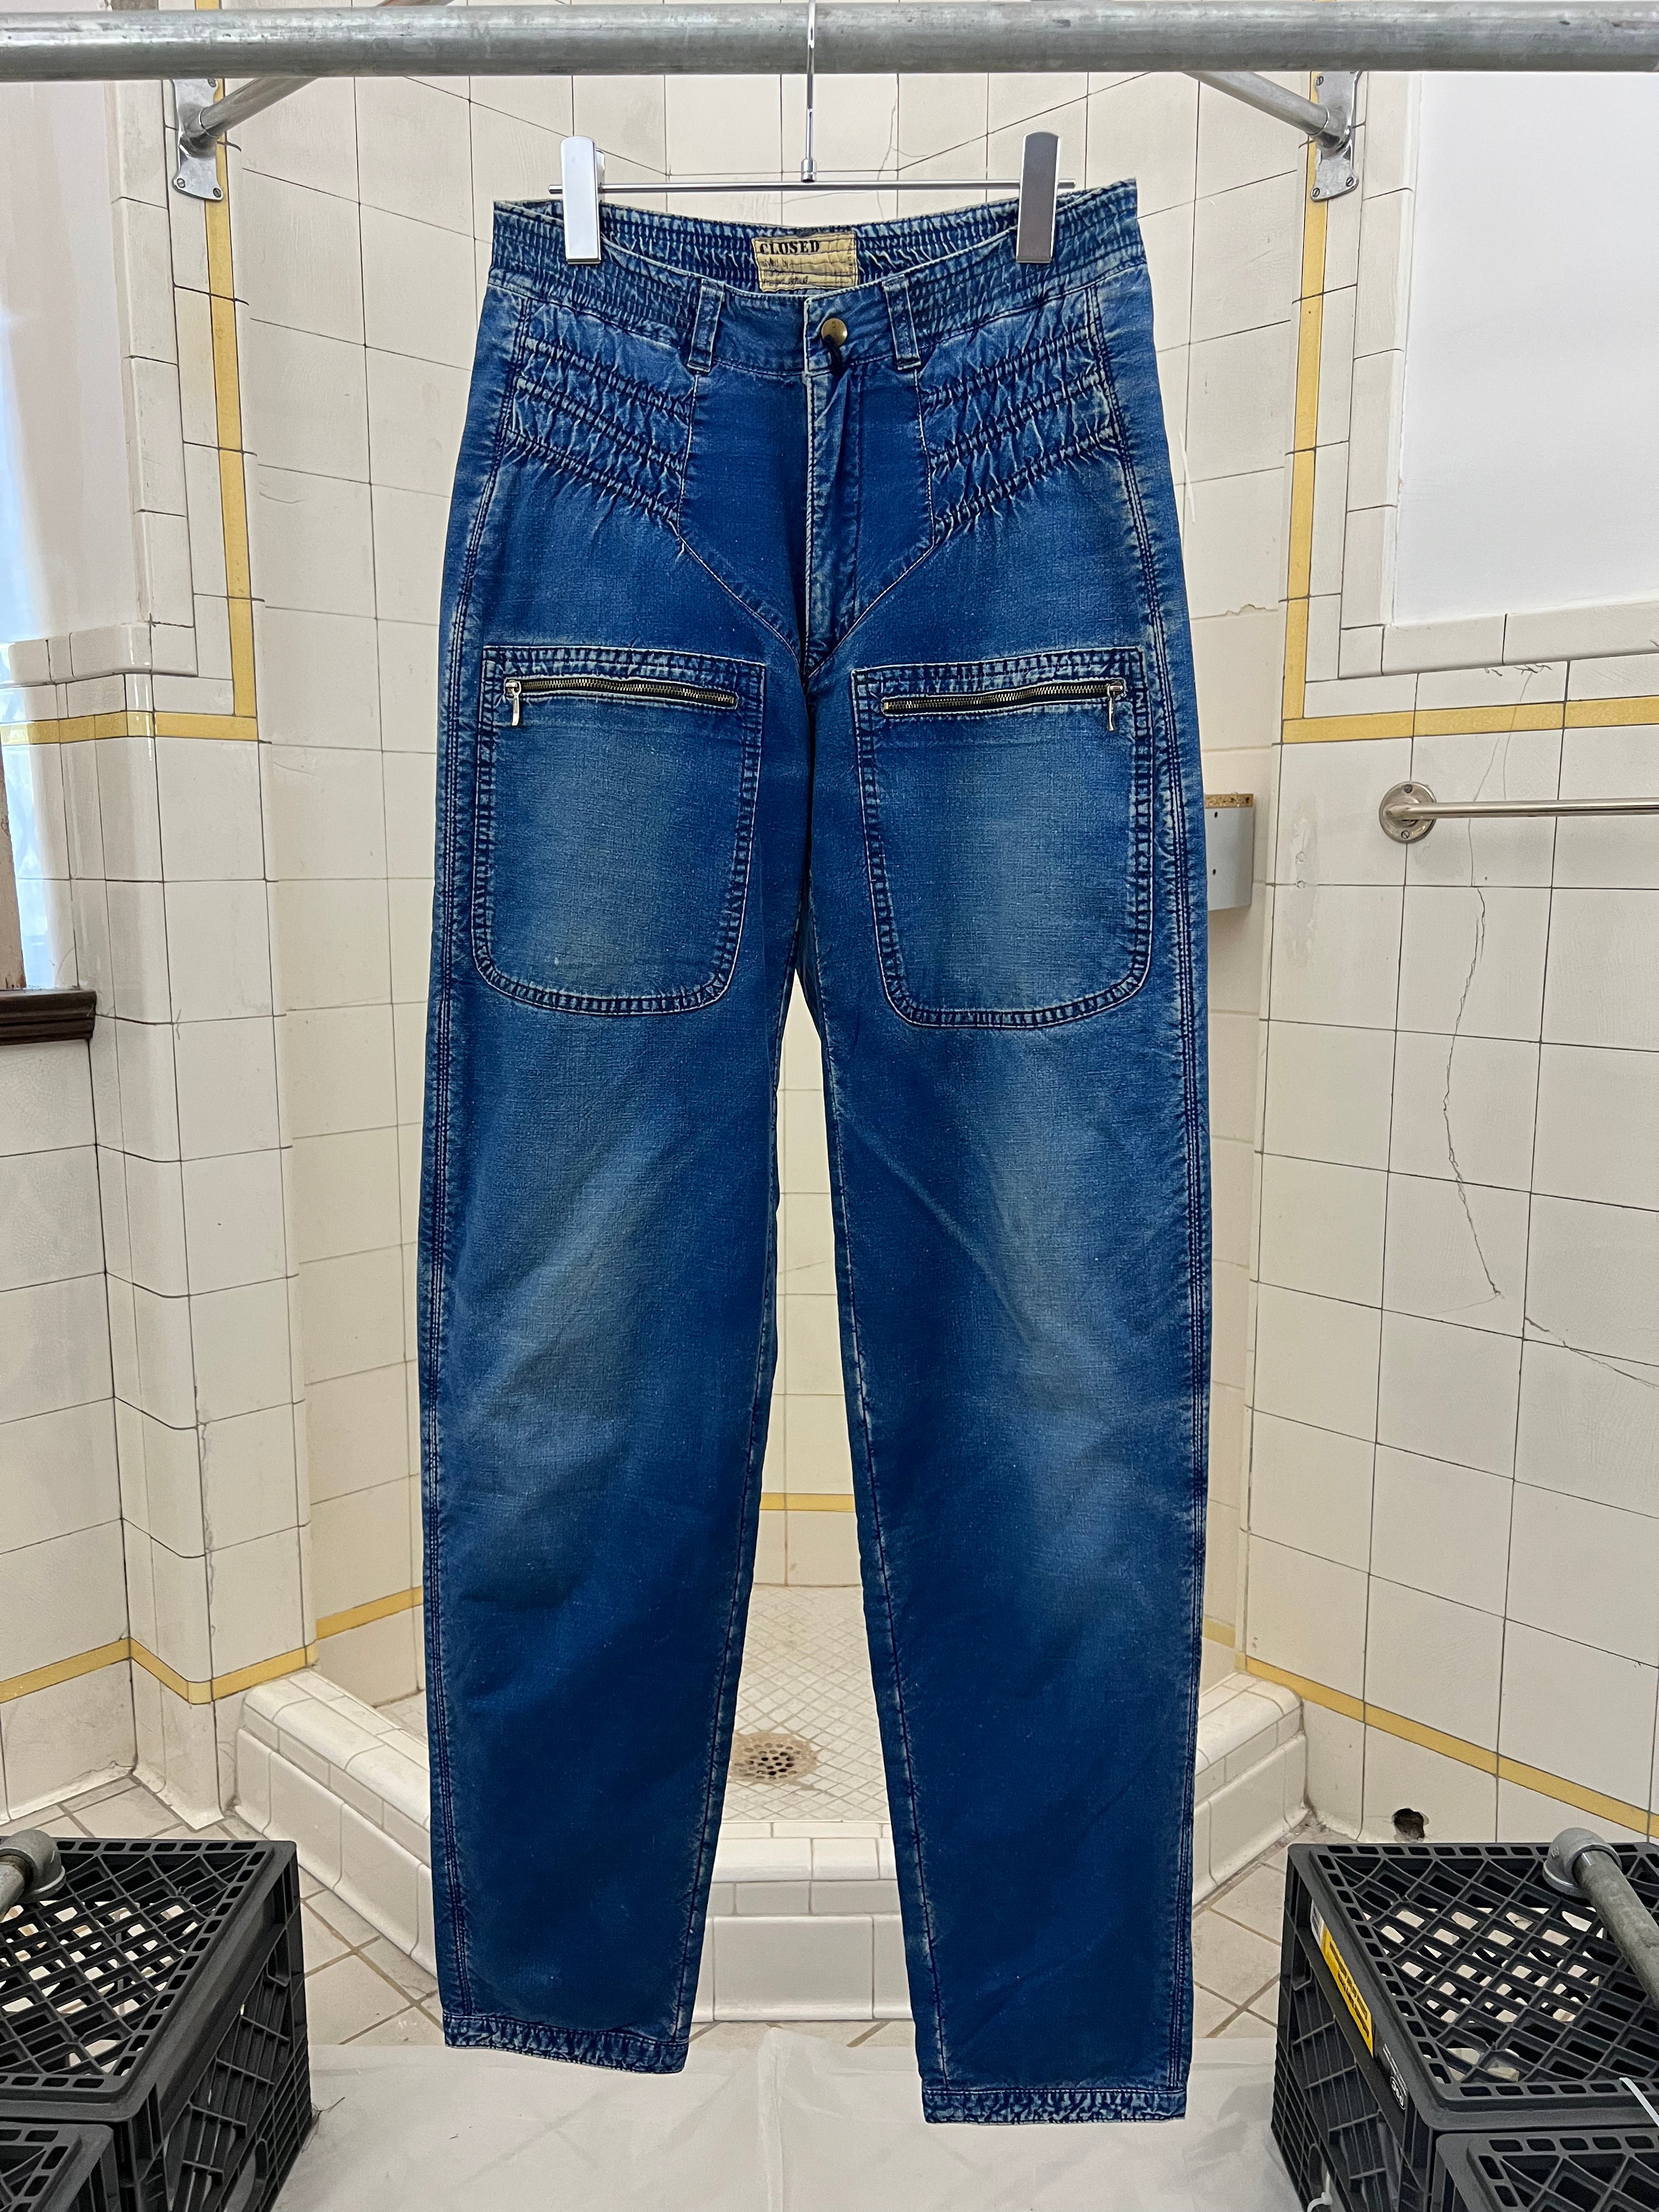 1980s Marithe Francois Girbaud x Closed Blue Jean Joggers with Zippered Hems - Size S